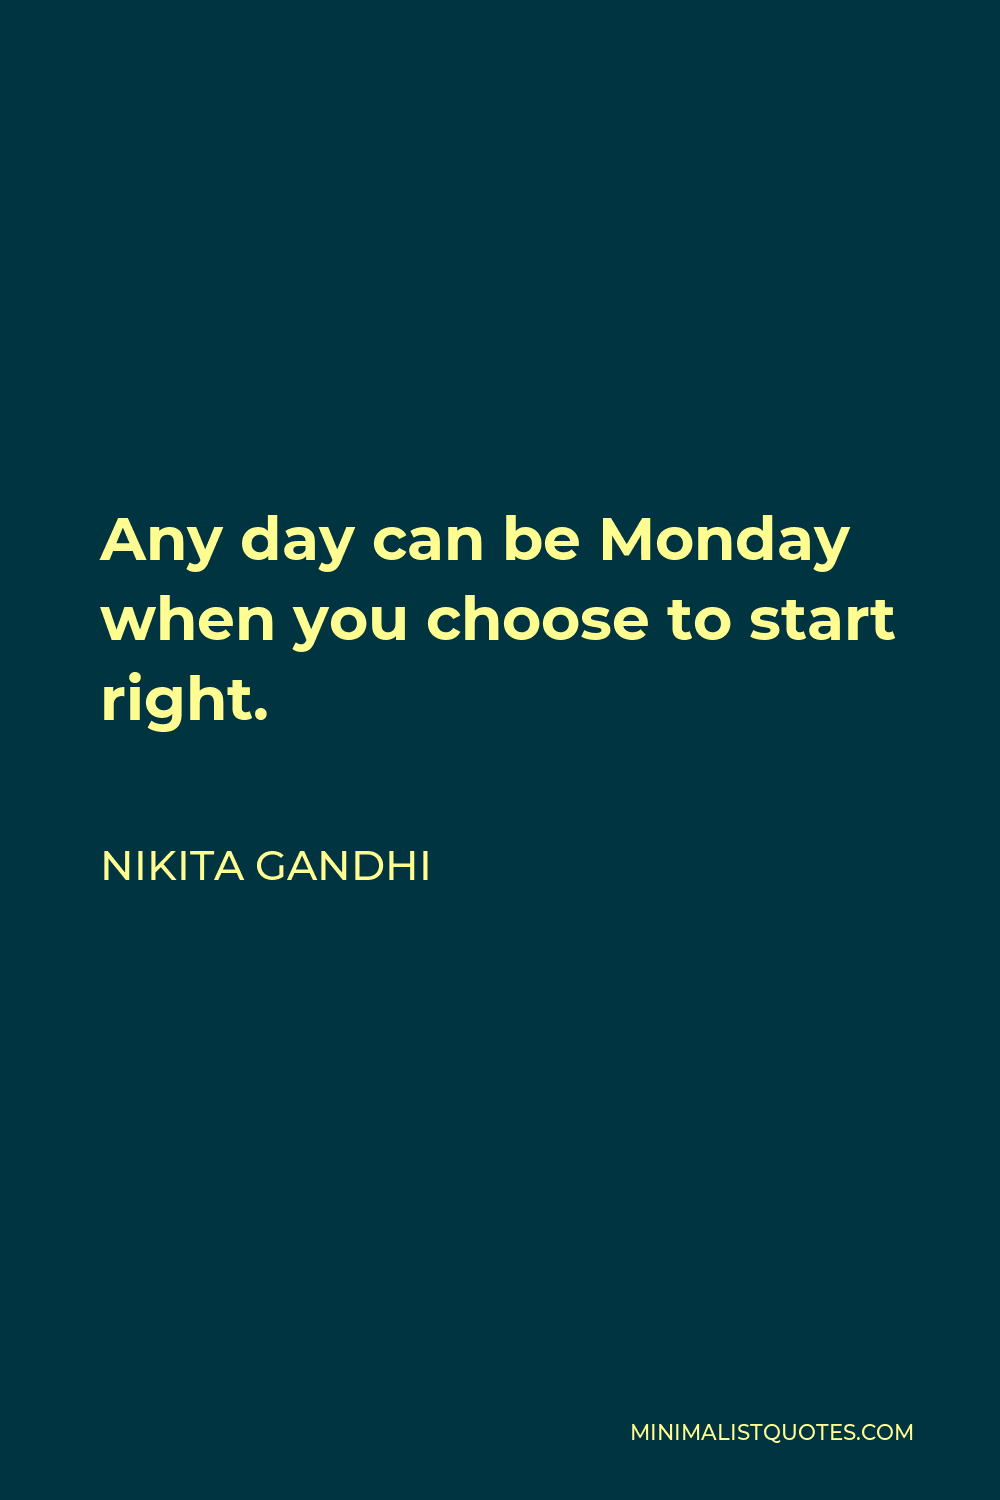 Nikita Gandhi Quote - Any day can be Monday when you choose to start right.